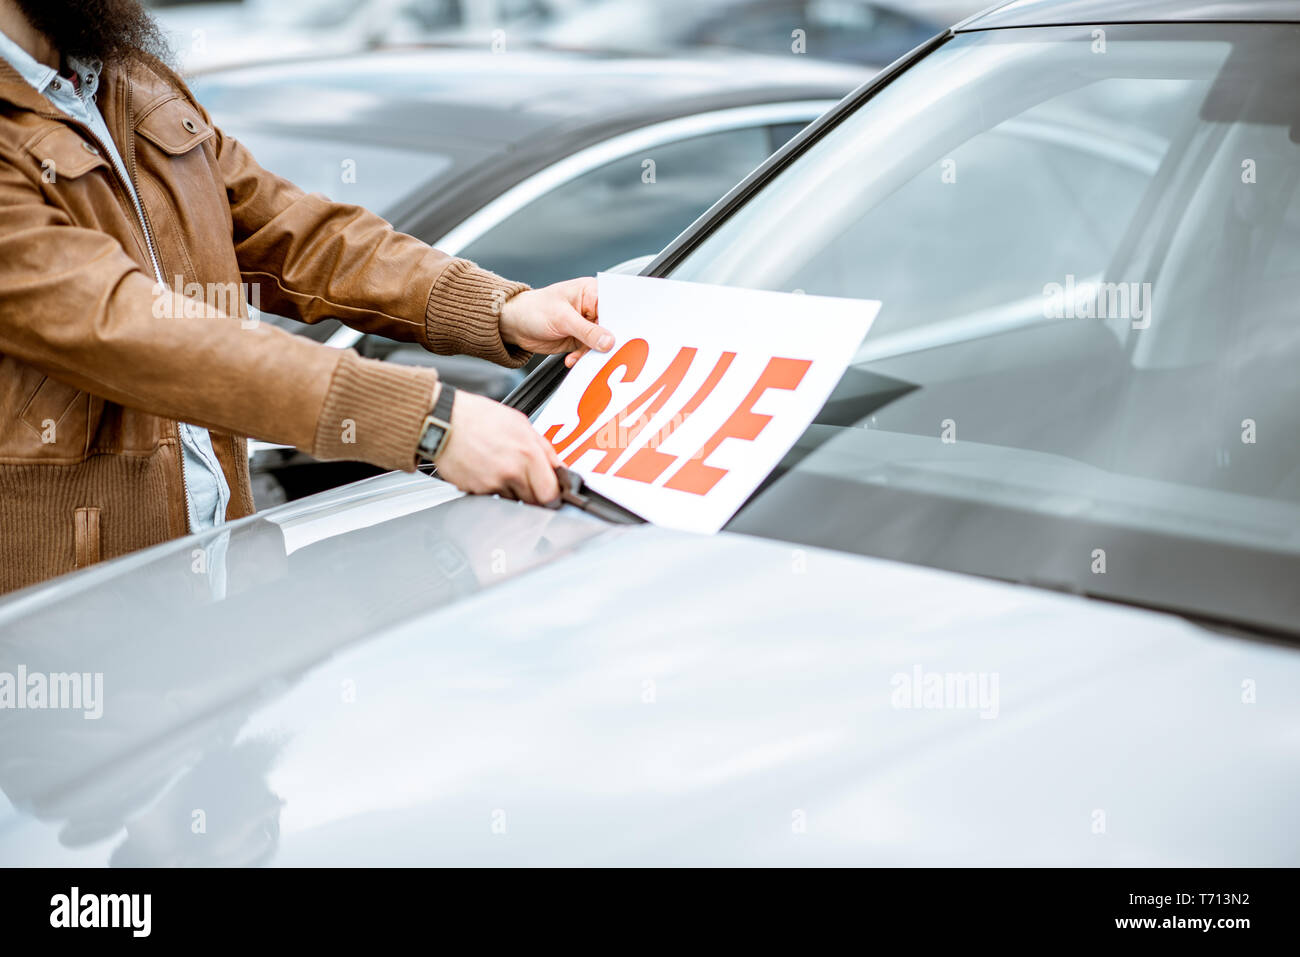 Salesperson putting sale plate on the car windshield on the open ground of a dealership, close-up view Stock Photo